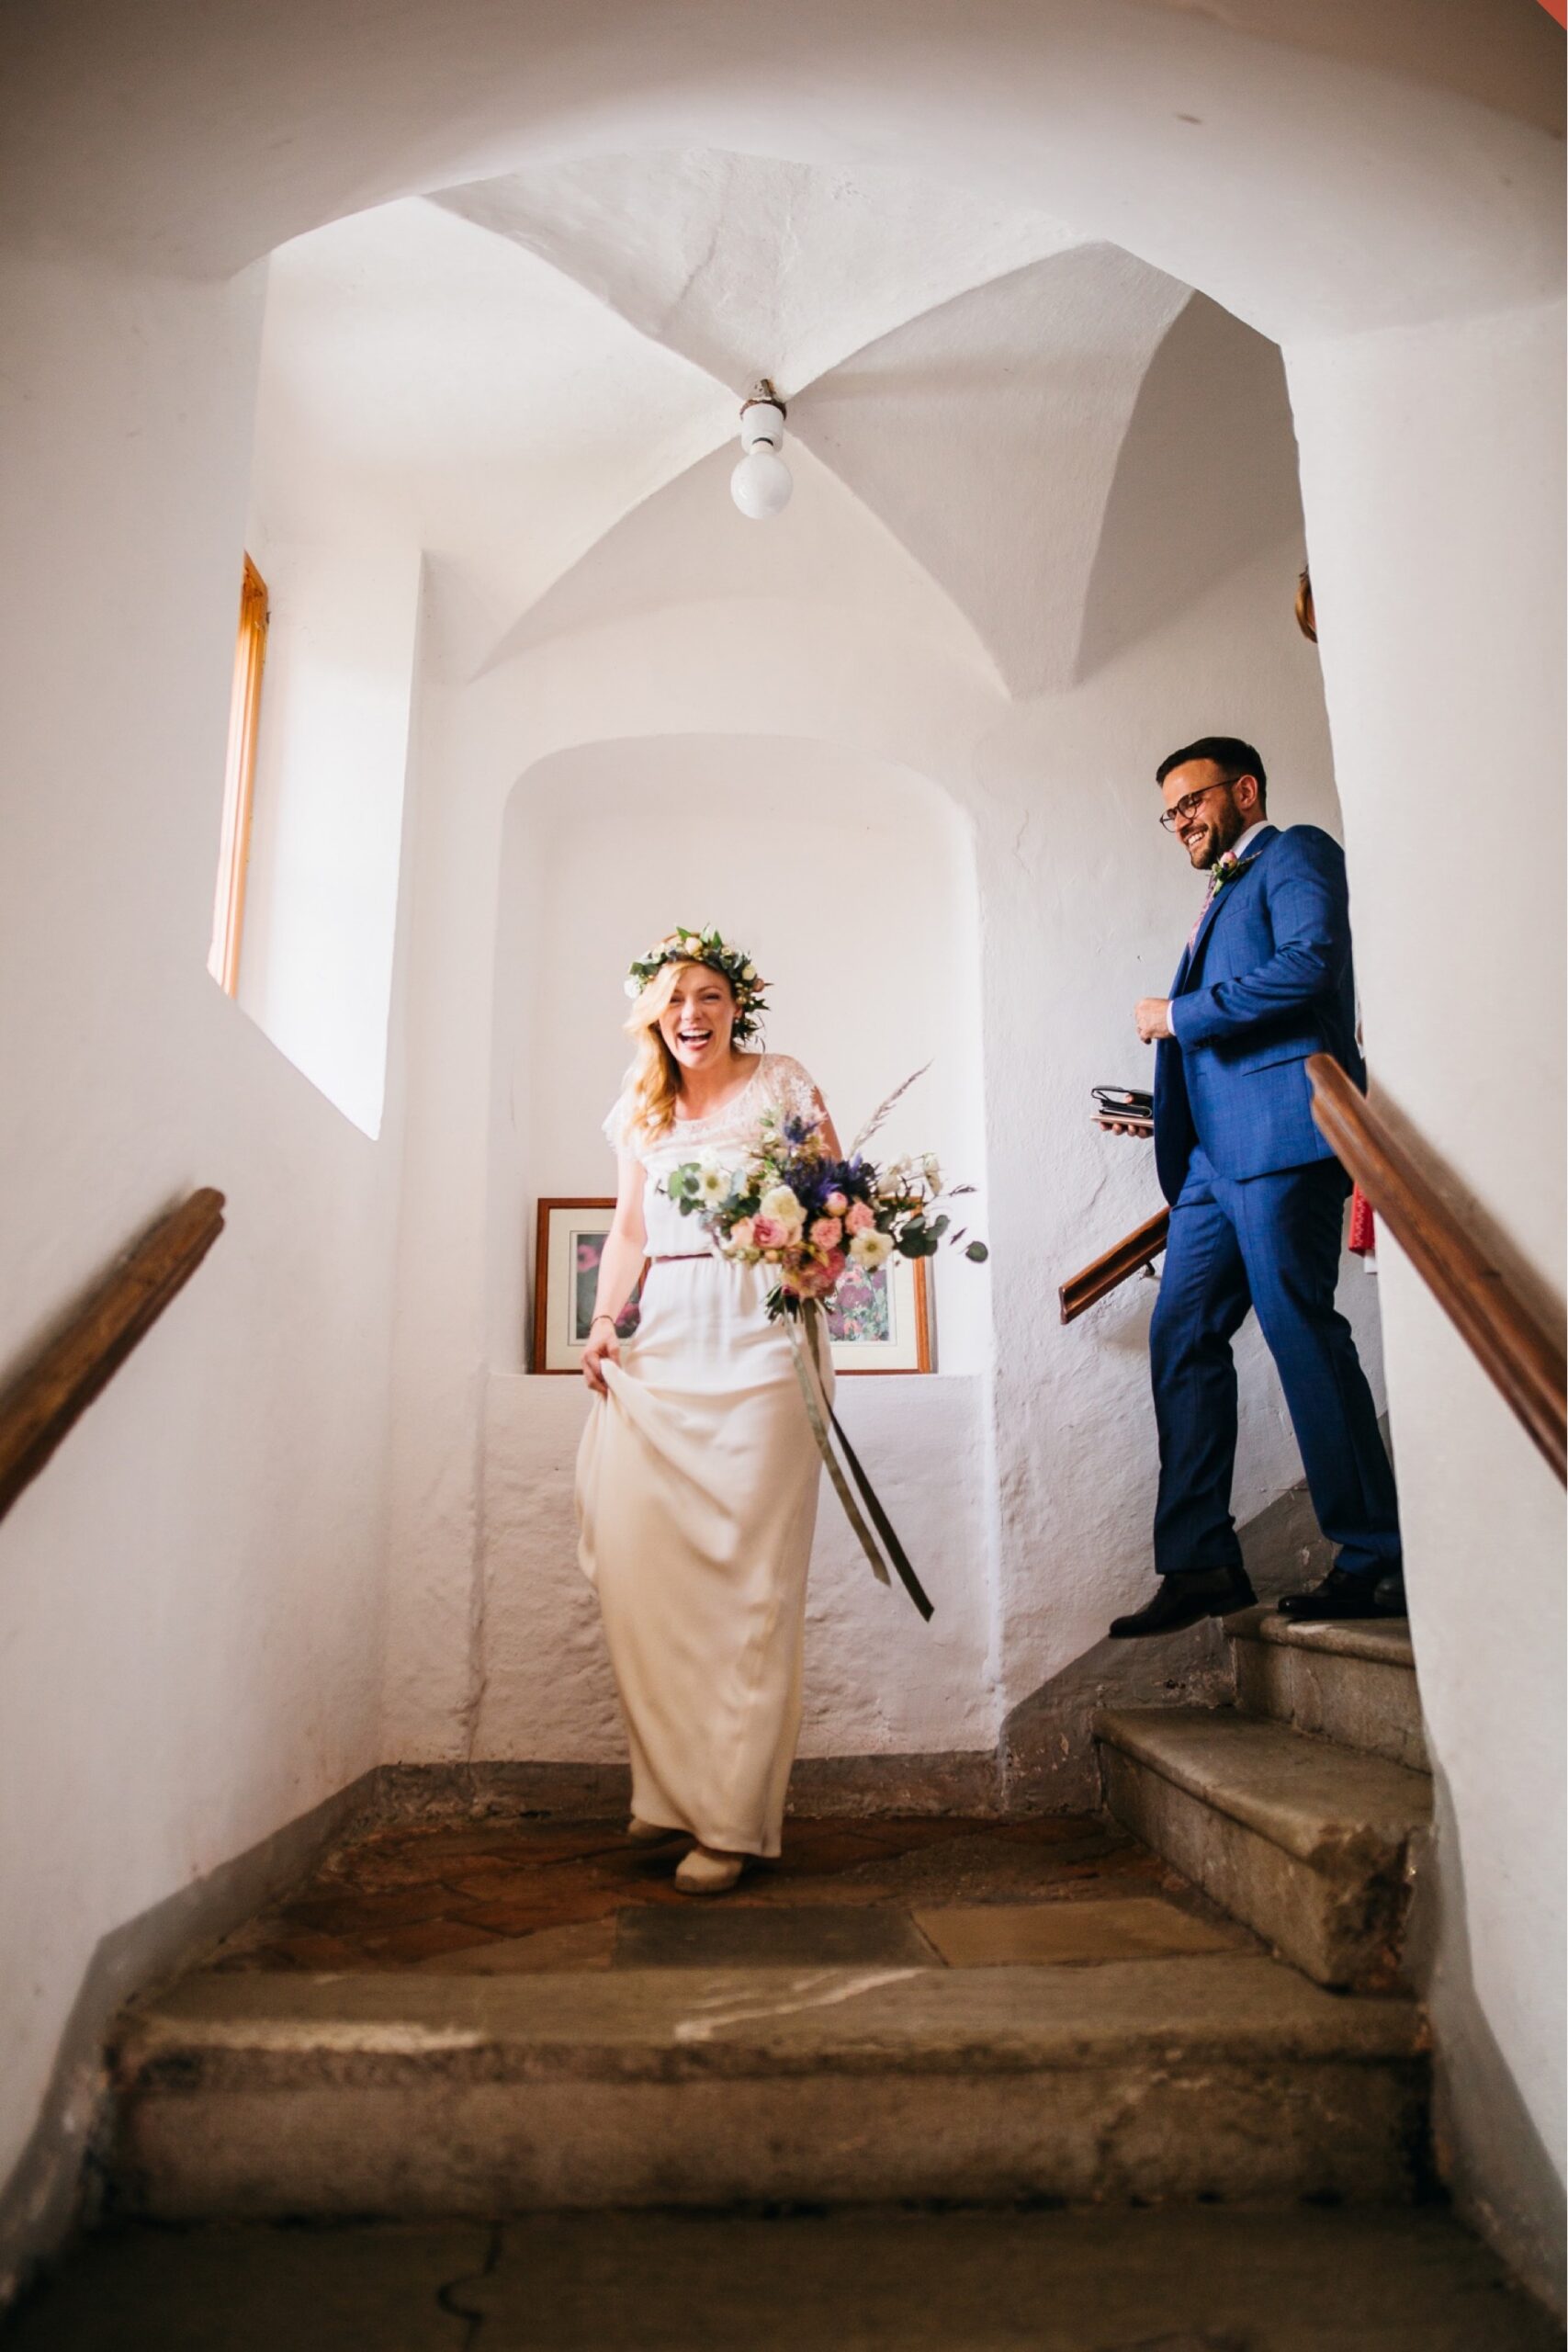 The bride and groom walk down a stone staircase in an Austrian courthouse.